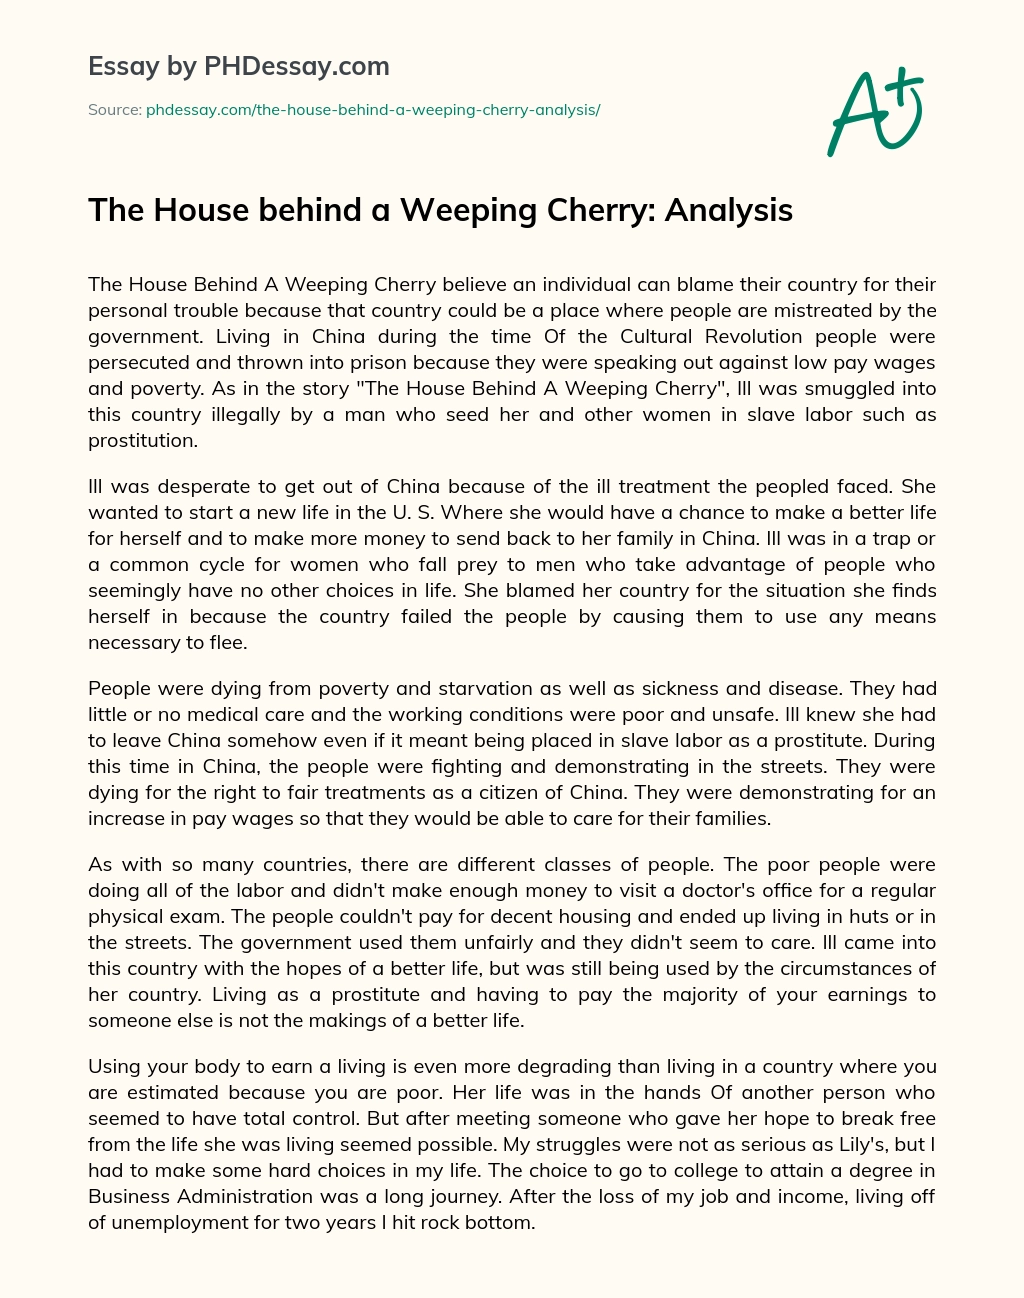 The House behind a Weeping Cherry: Analysis essay